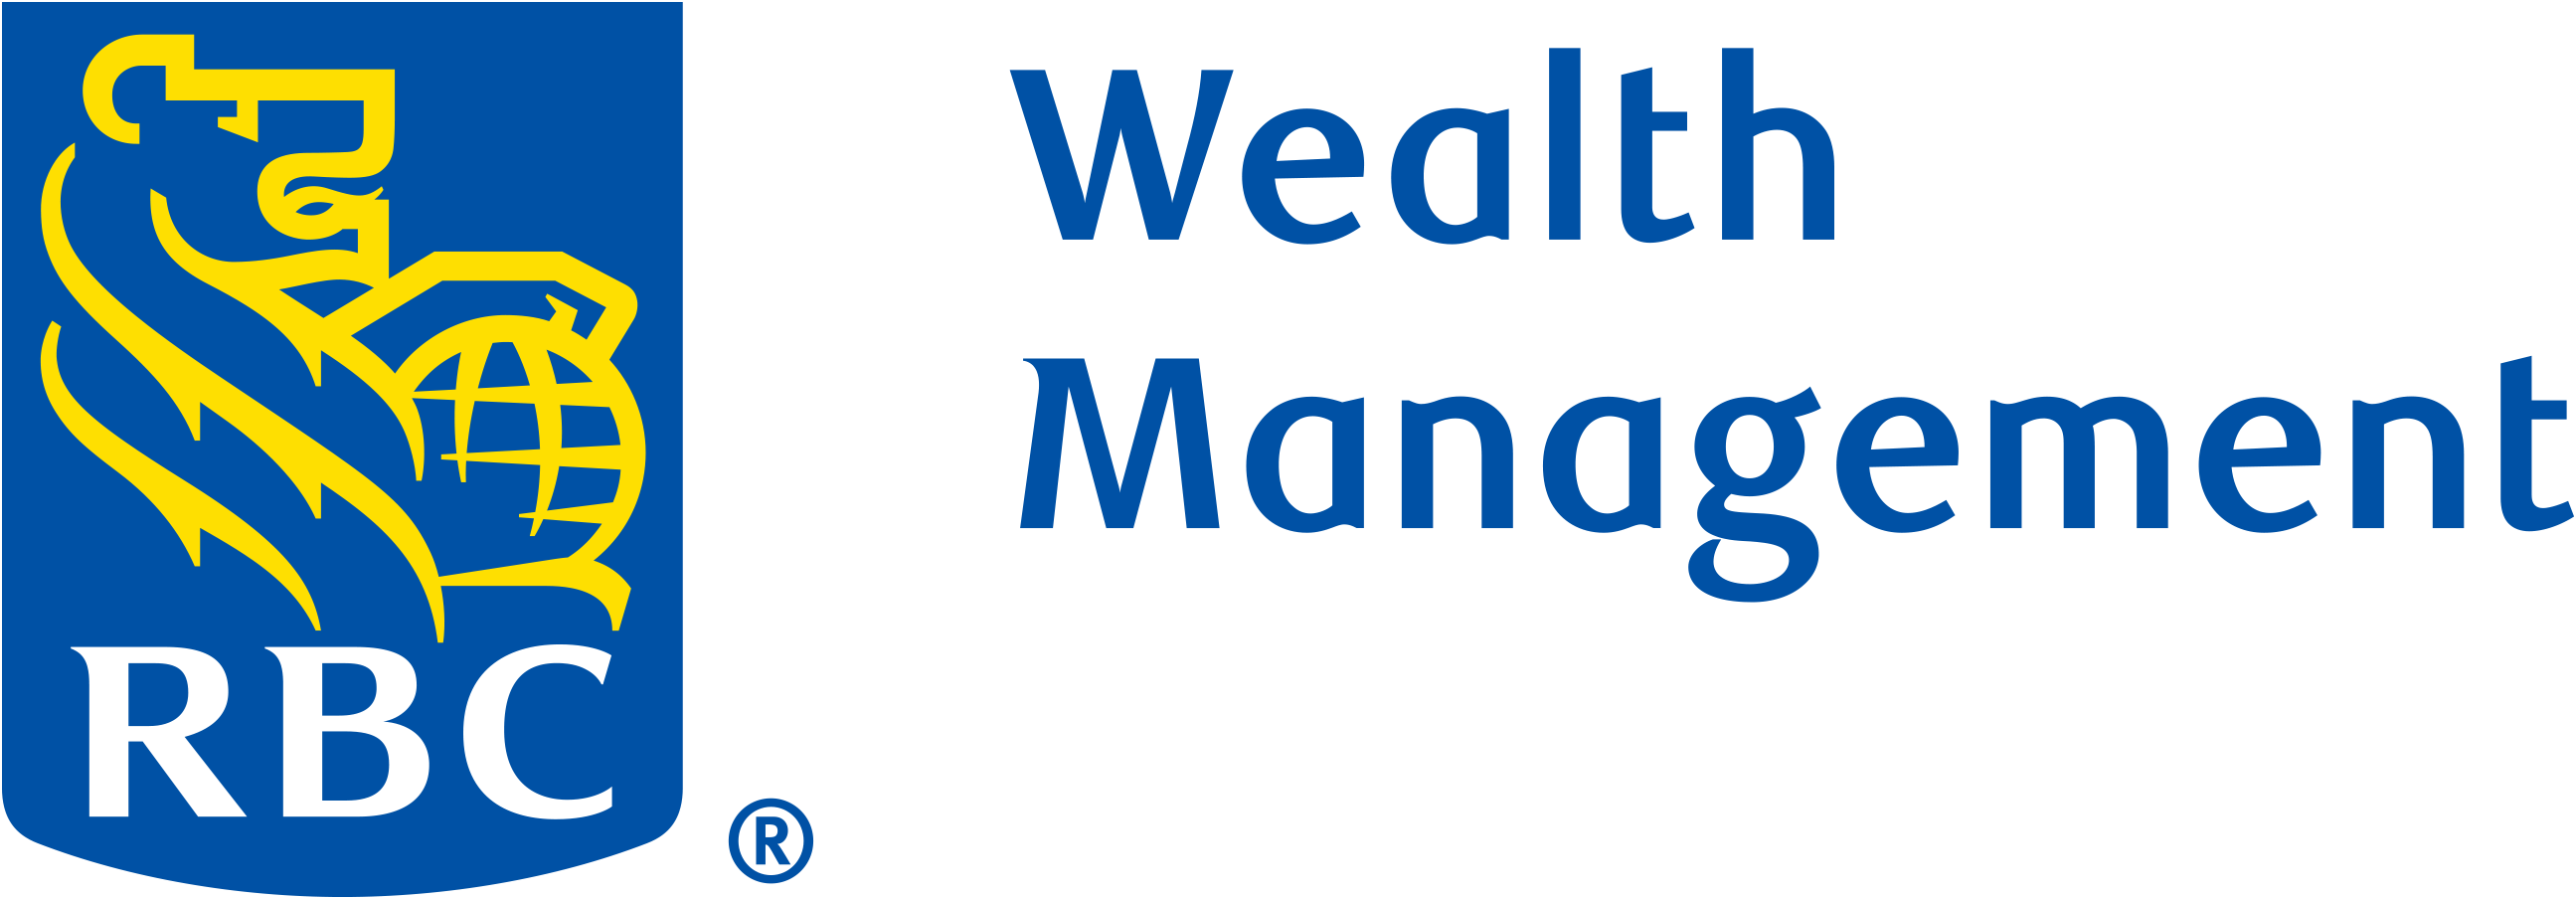 RBC Wealth Management logo with yellow, blue, and white shield